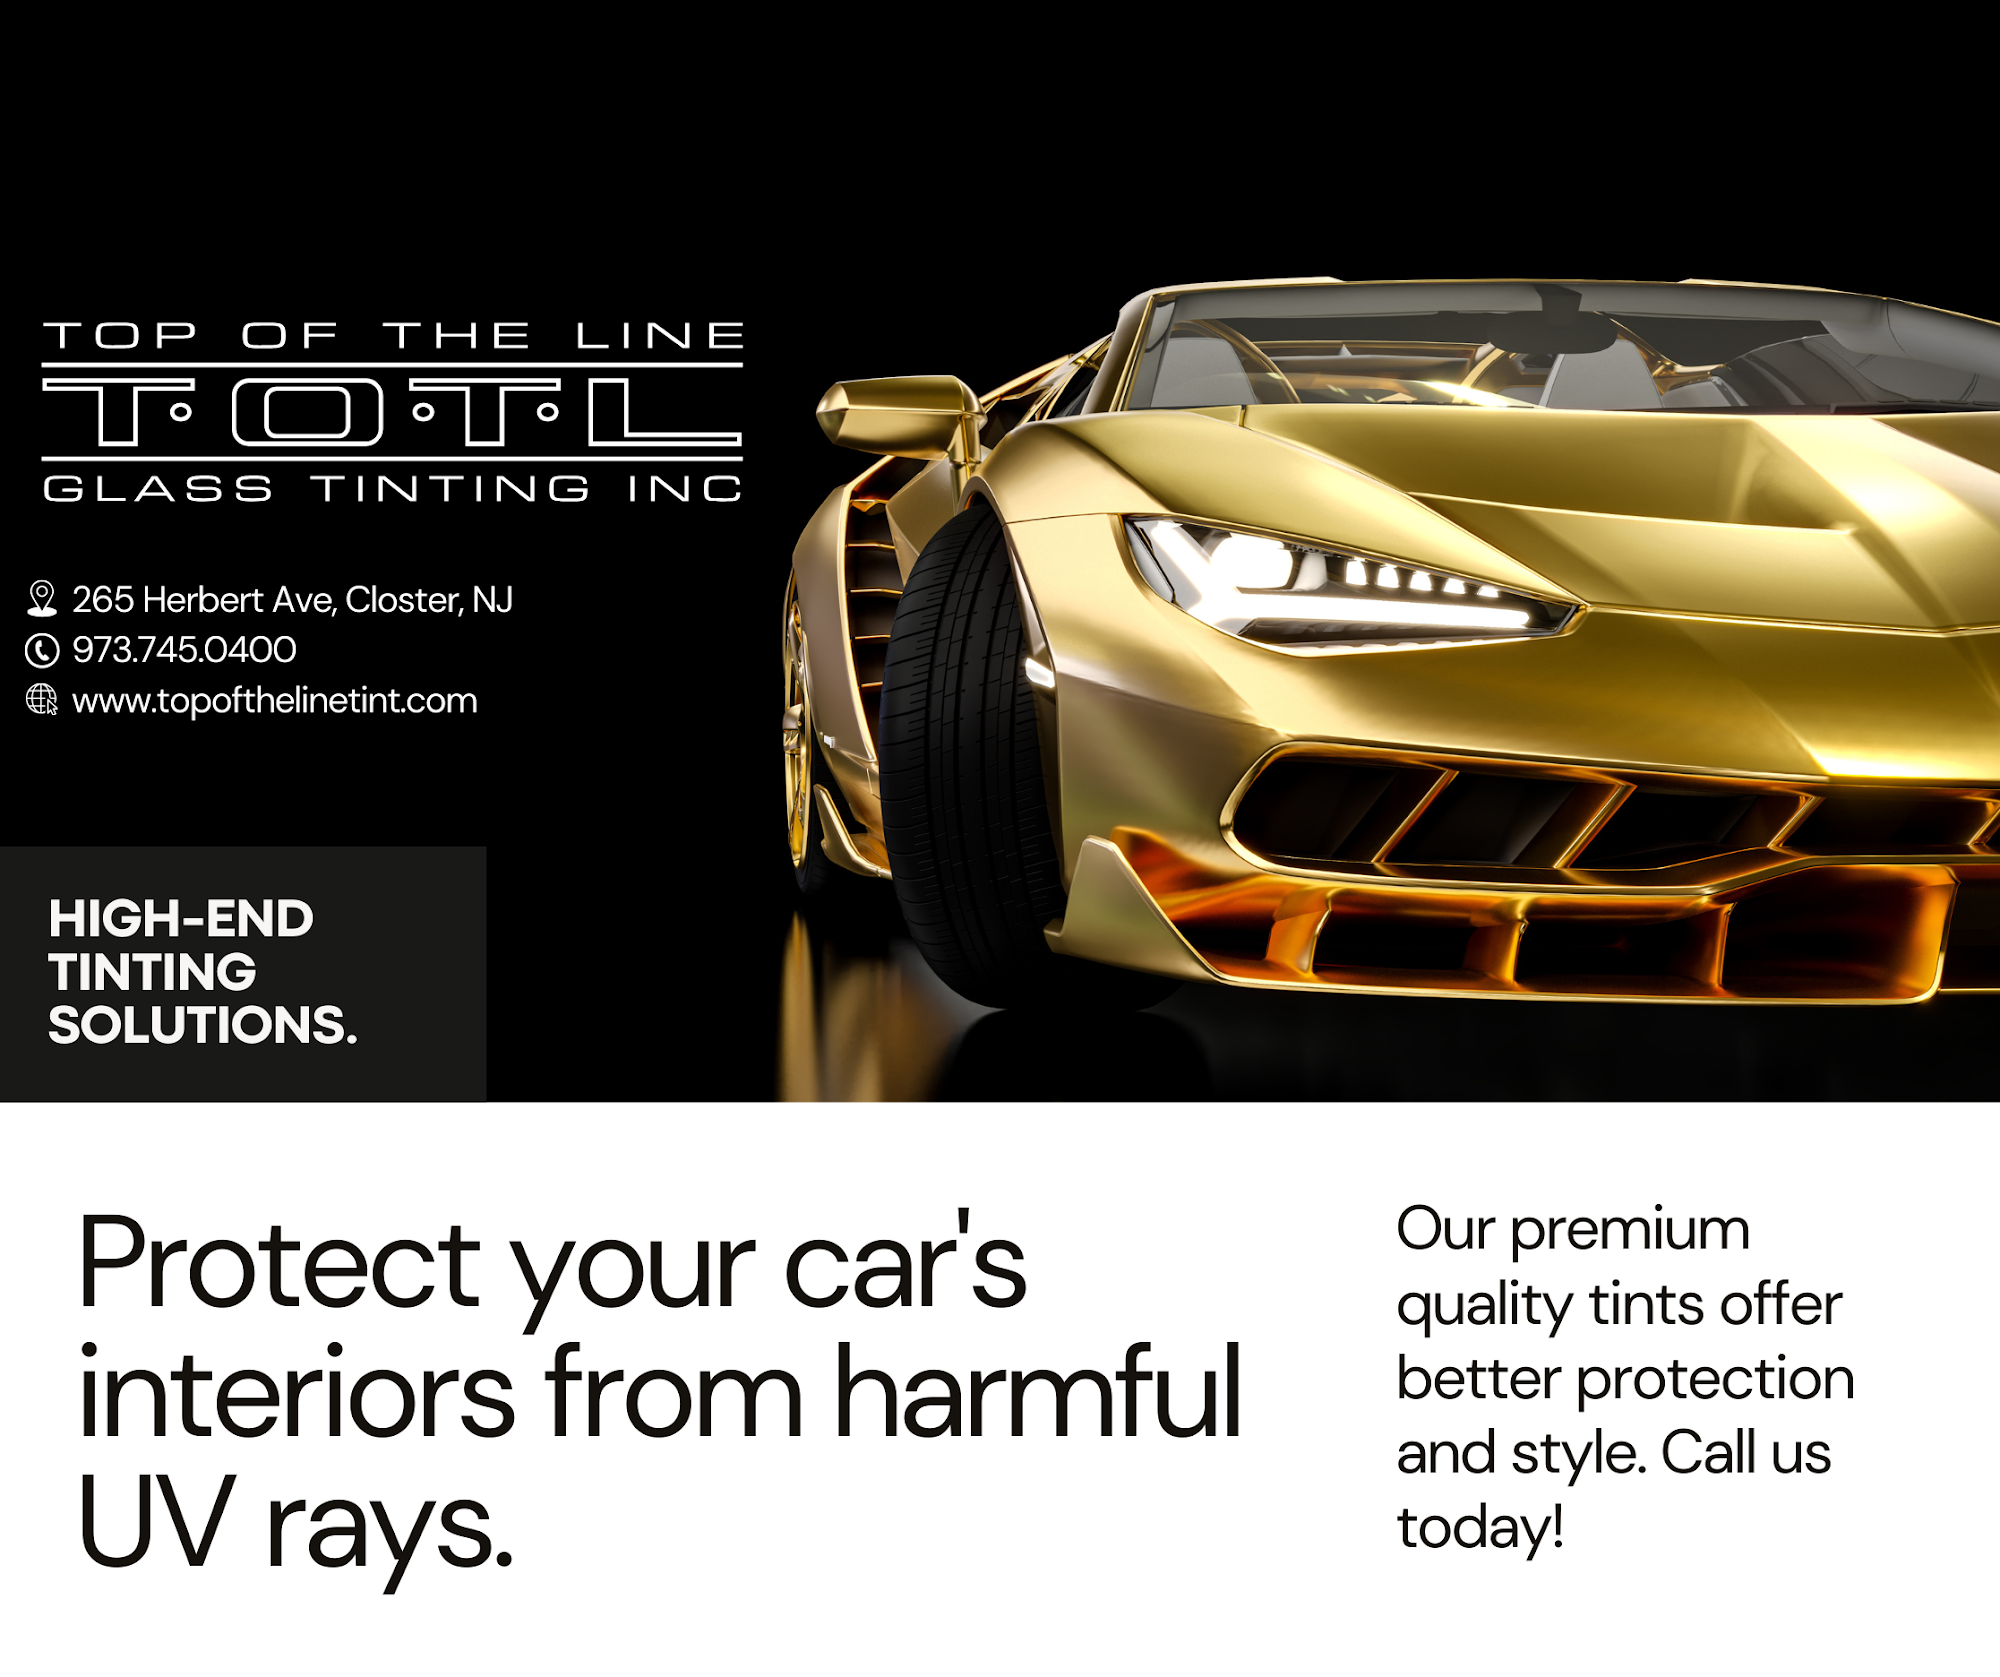 Top Of The Line Glass Tinting Inc. 265 Herbert Ave, Closter New Jersey 07624